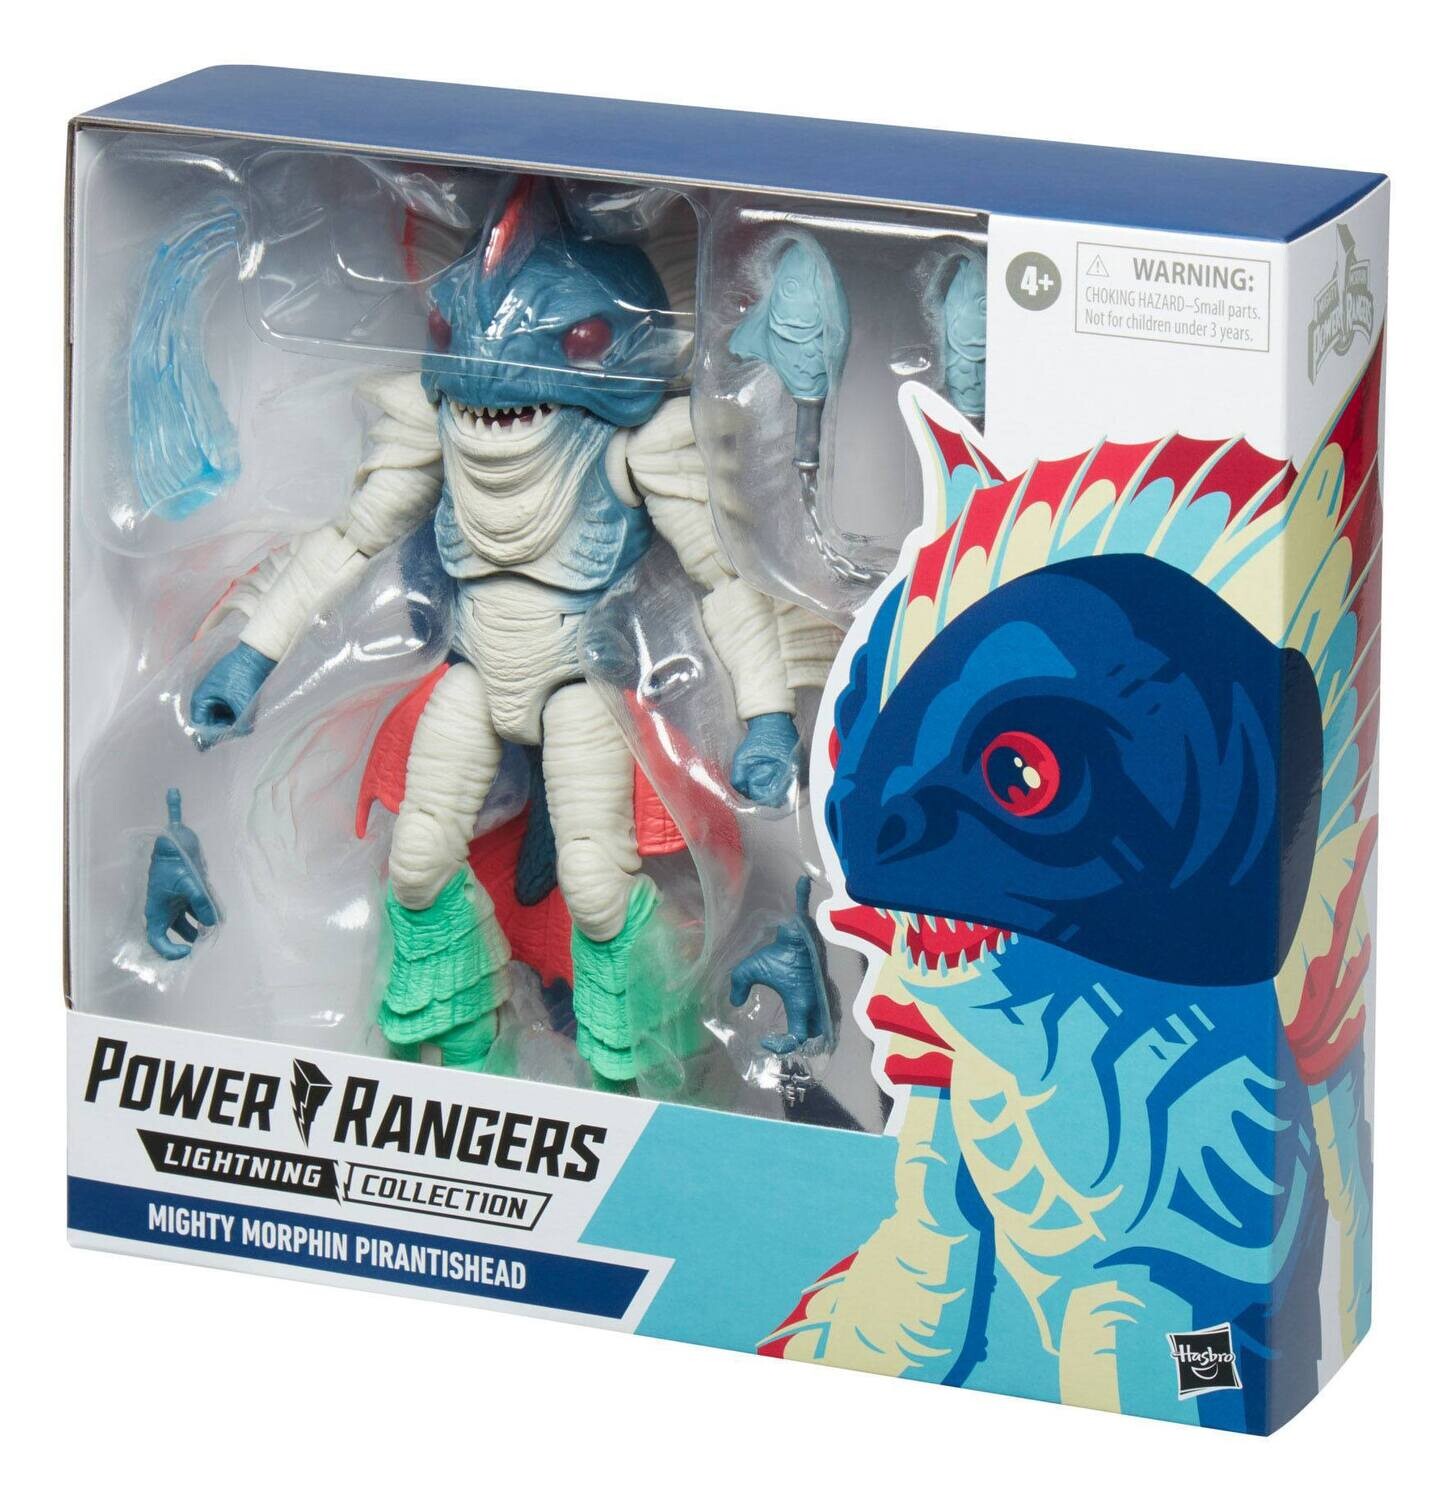 PRE-ORDER Power Rangers Lightning Collection Mighty Morphin Pirantishead Figure [35,99]